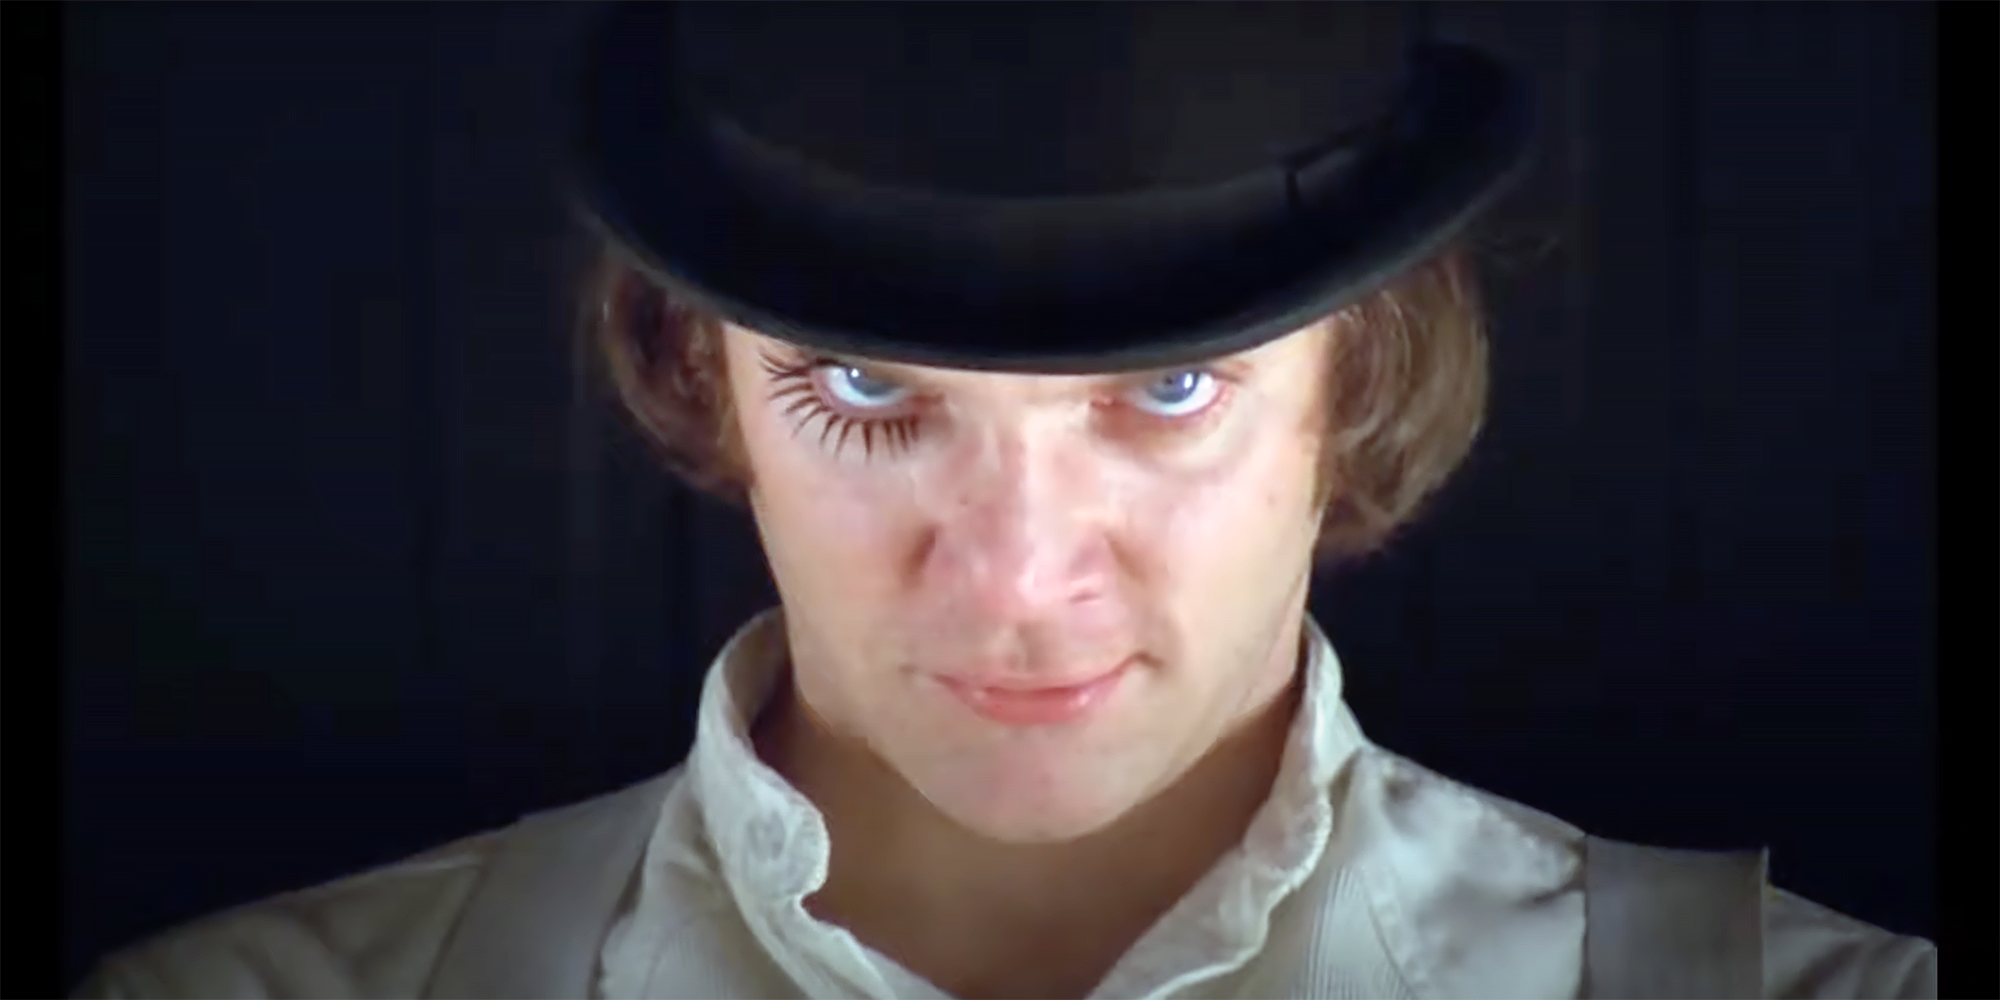 Stanley Kubrick's fourth-wall-breaking opening scene in 'A Clockwork Orange' sets the tone for the rest of the movie